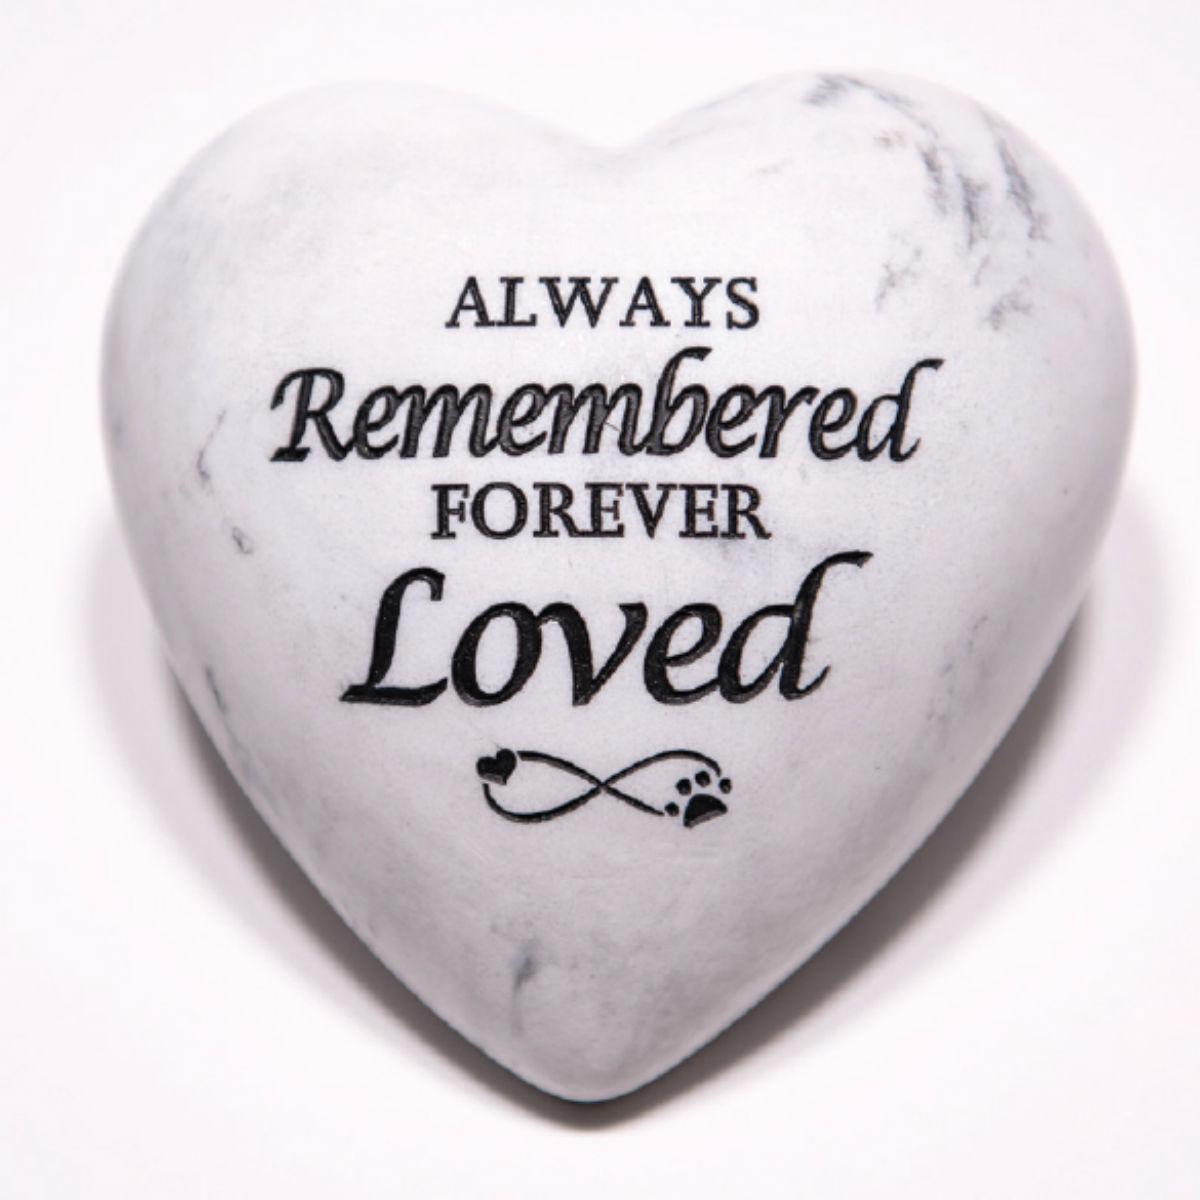 Dog Speak Inspirational Stone Paperweight - Always Remembered Forever Loved